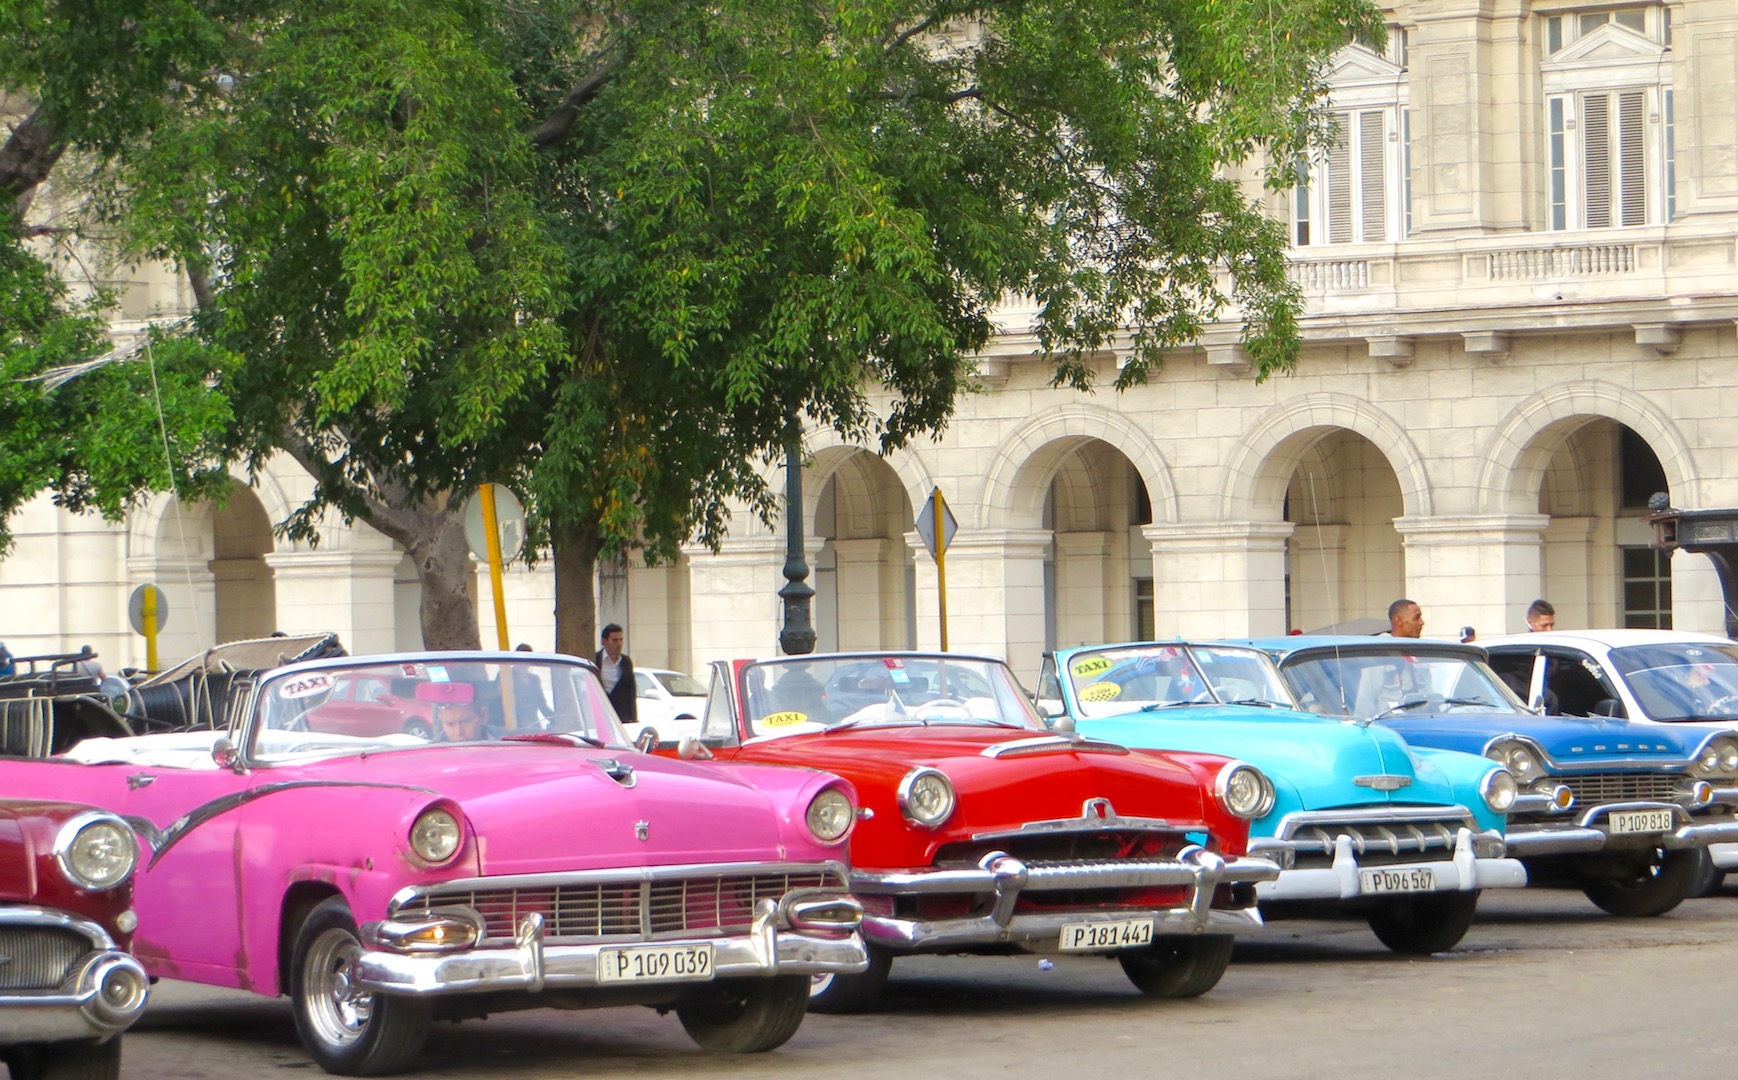 My Visit to Cuba - Elie Axelroth